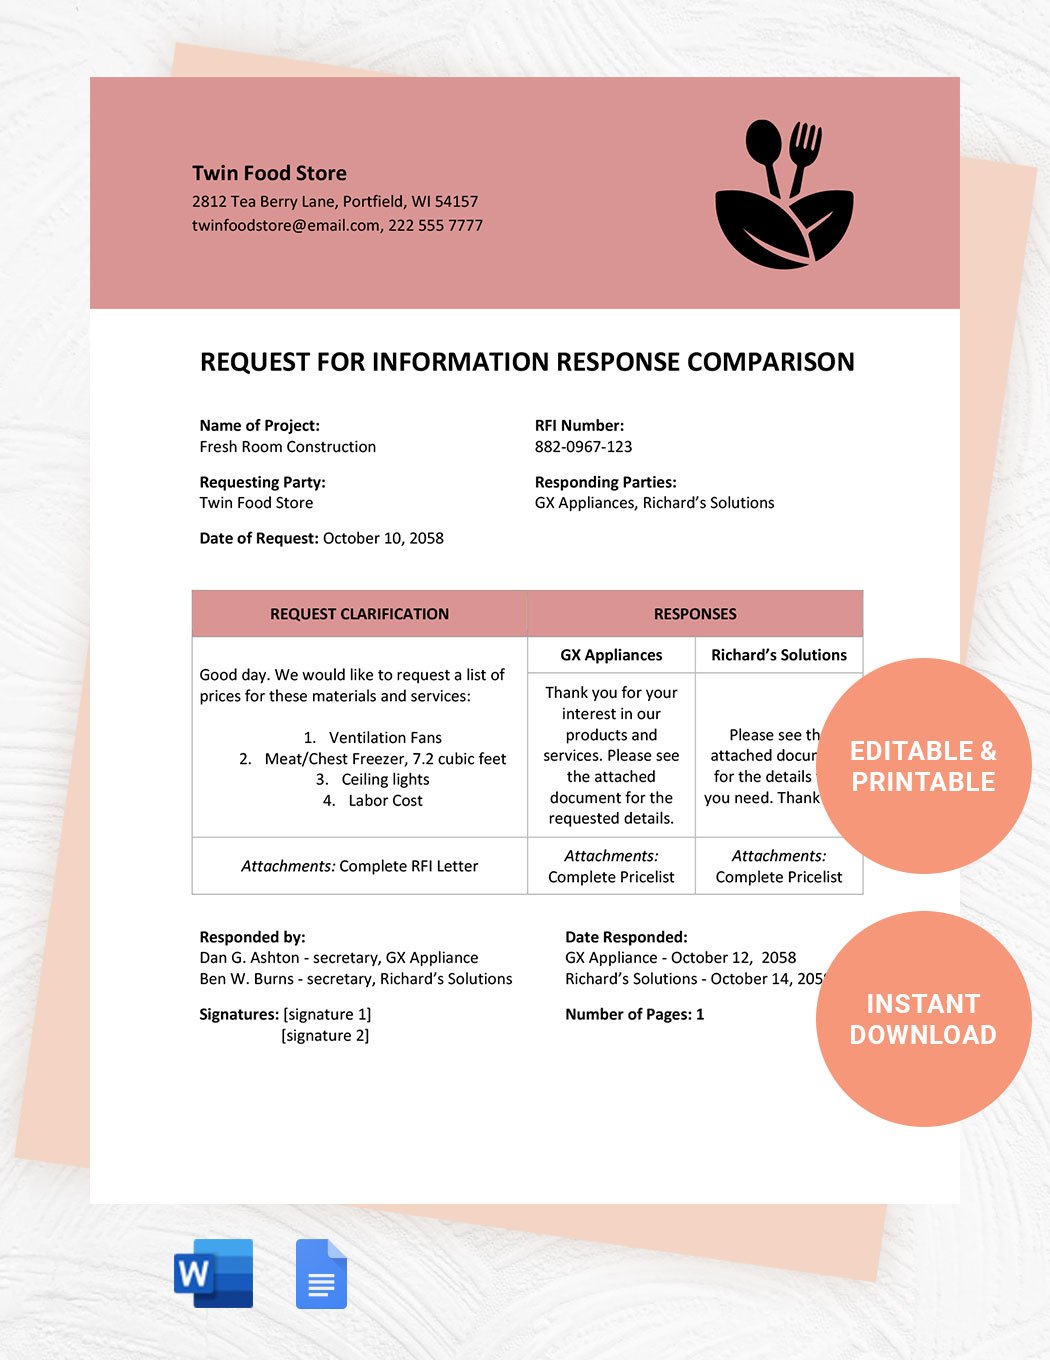 Request For Information Response Template in Word, Google Docs